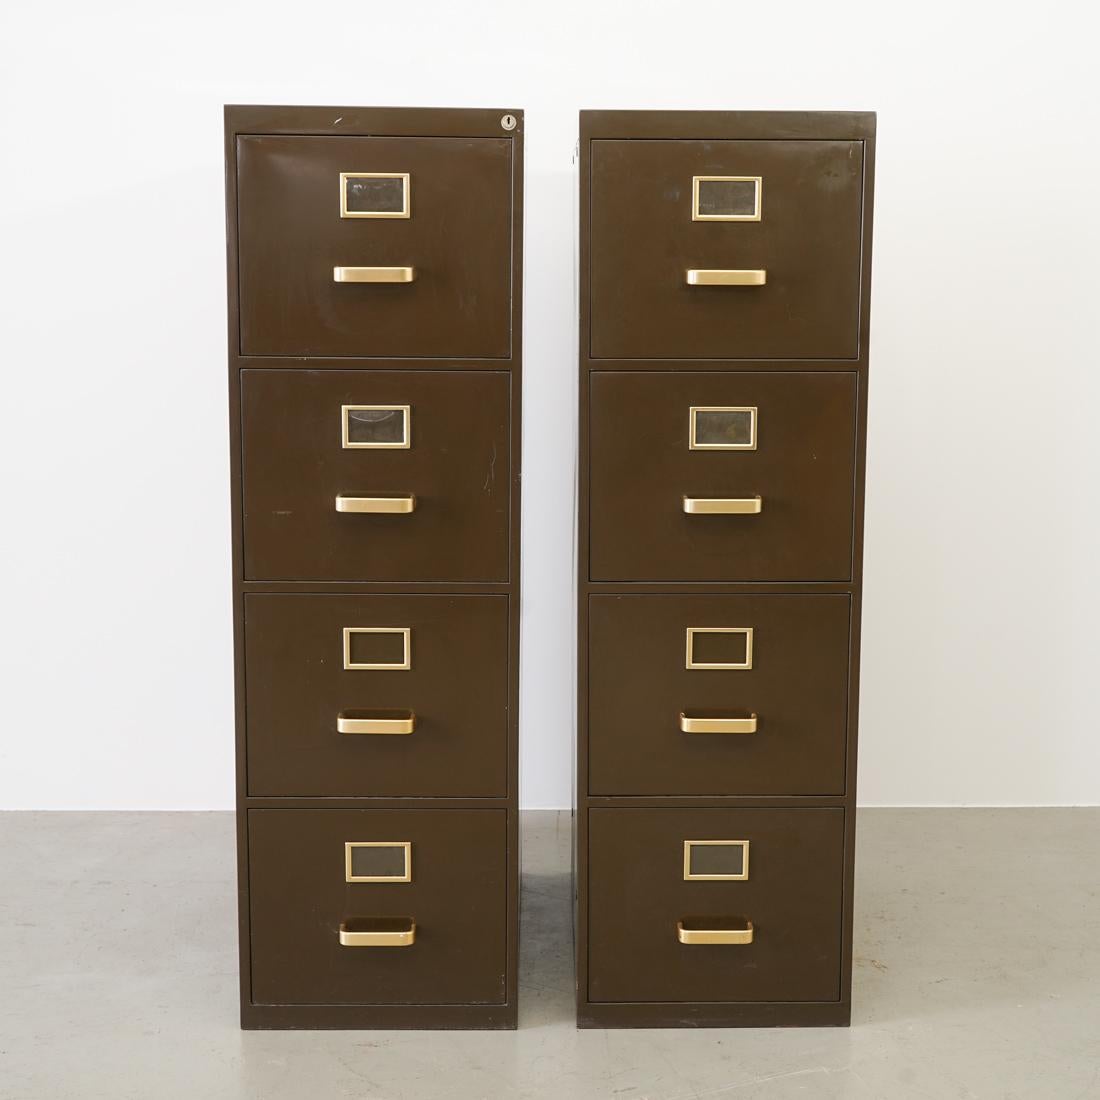 The drawer cabinet made of original painted sheet steel manufactured in the late 1960s by the Swiss metal works MEWA. The charme of vintage and solid materials are able to enrich every office or modern interior.
The four large drawers that can be